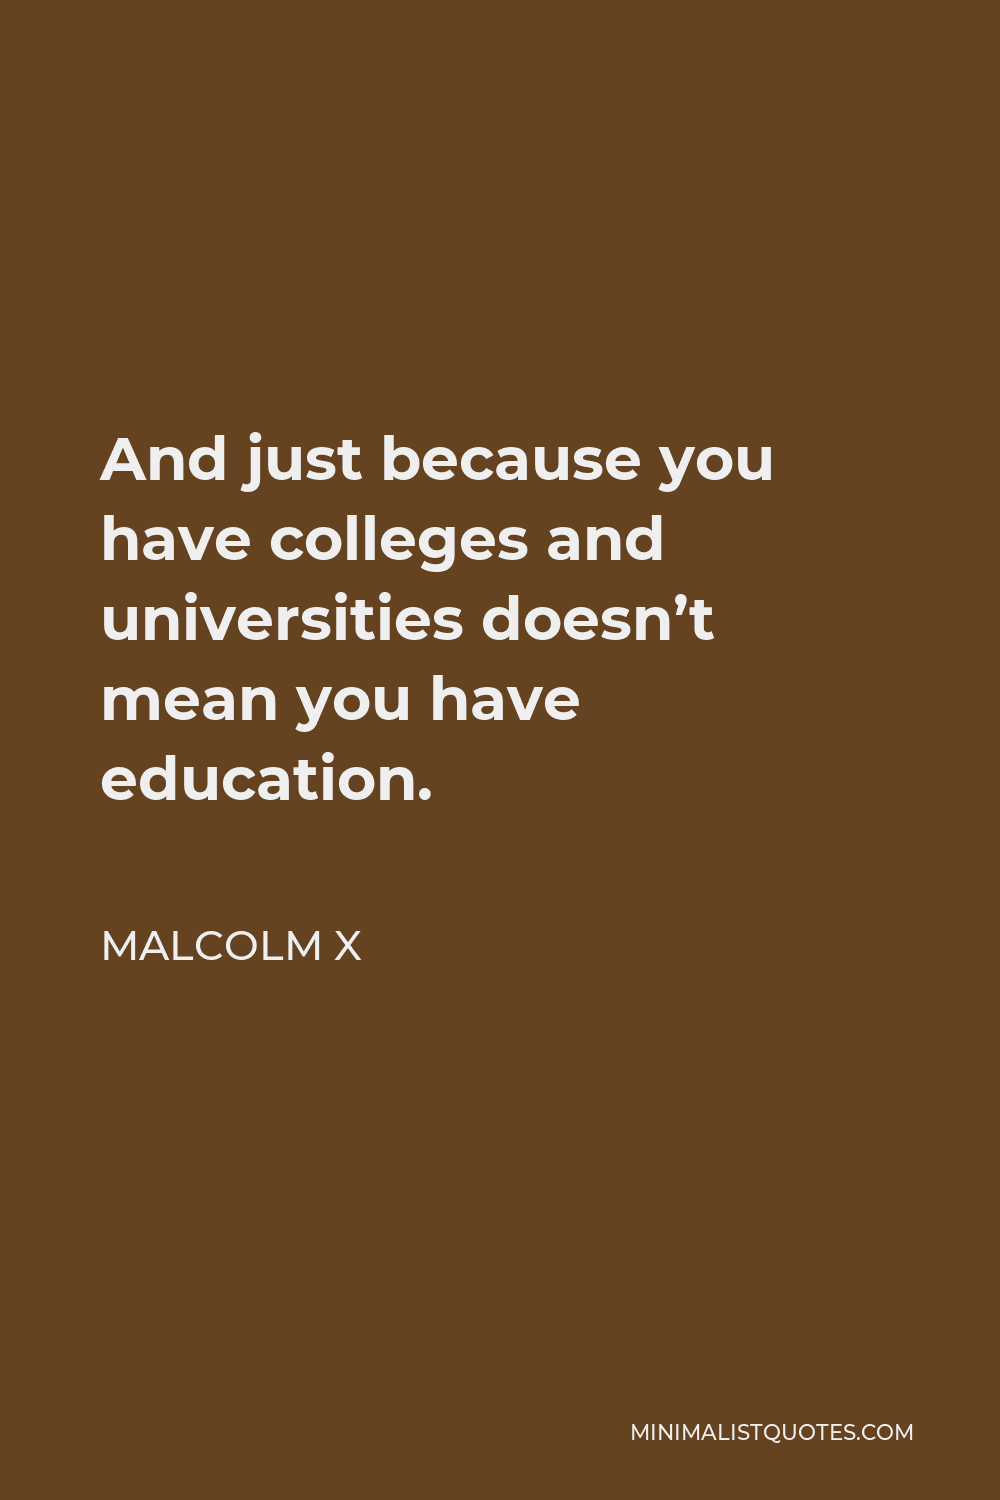 Malcolm X Quote - And just because you have colleges and universities doesn’t mean you have education.